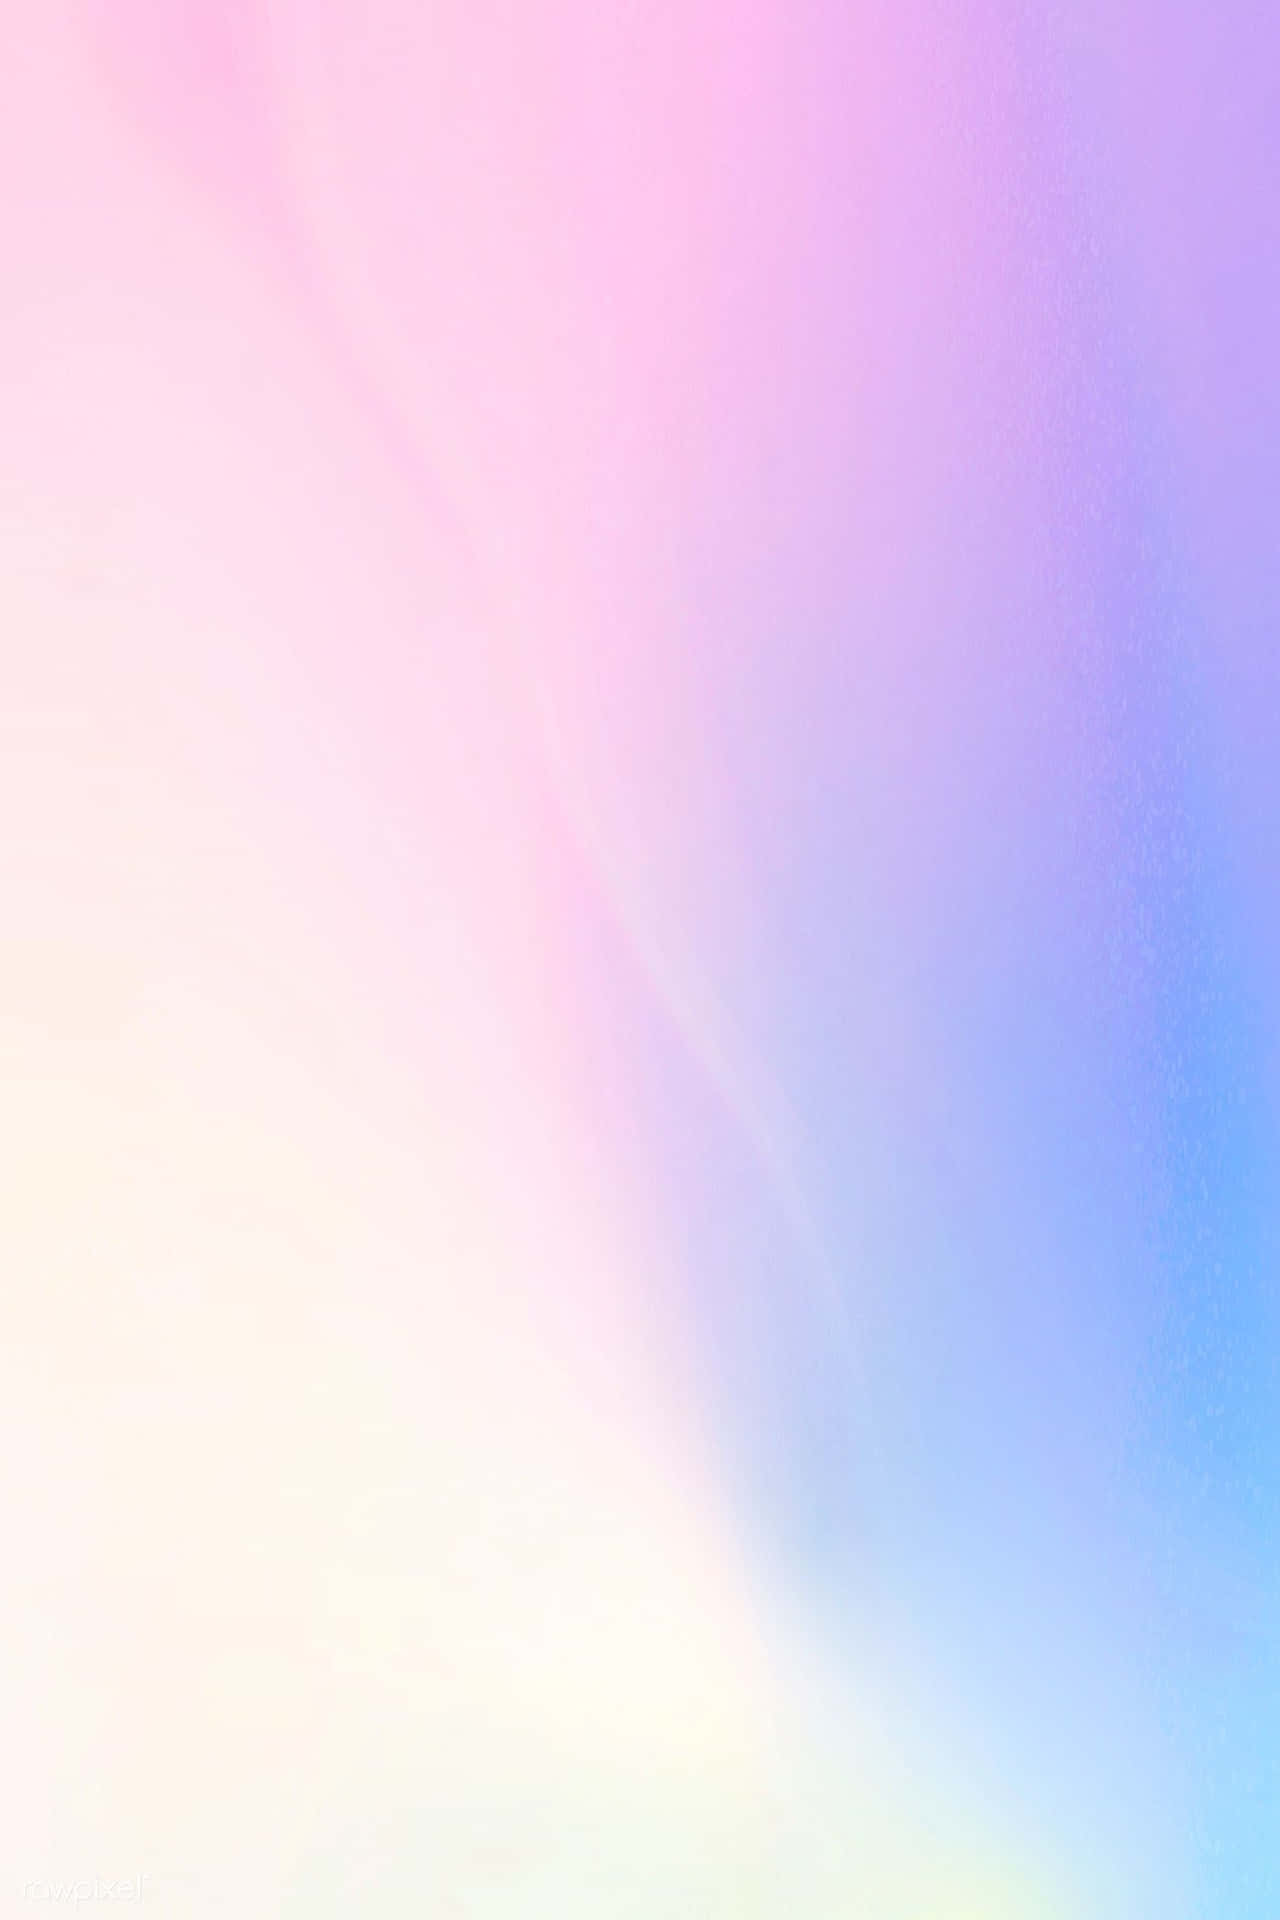 Download Pink Ombre Background 1400 X 2100 | Wallpapers.com